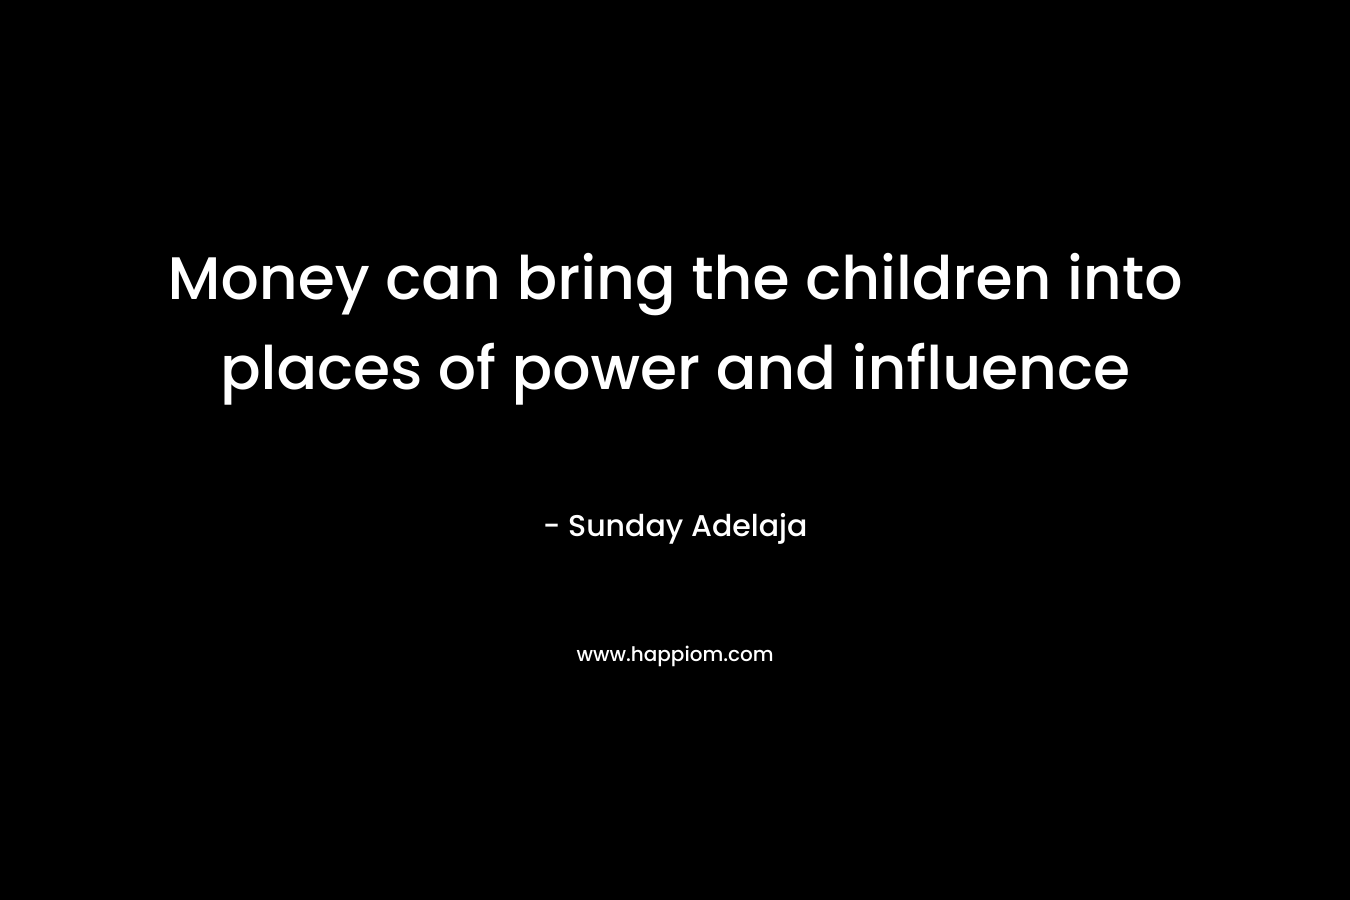 Money can bring the children into places of power and influence